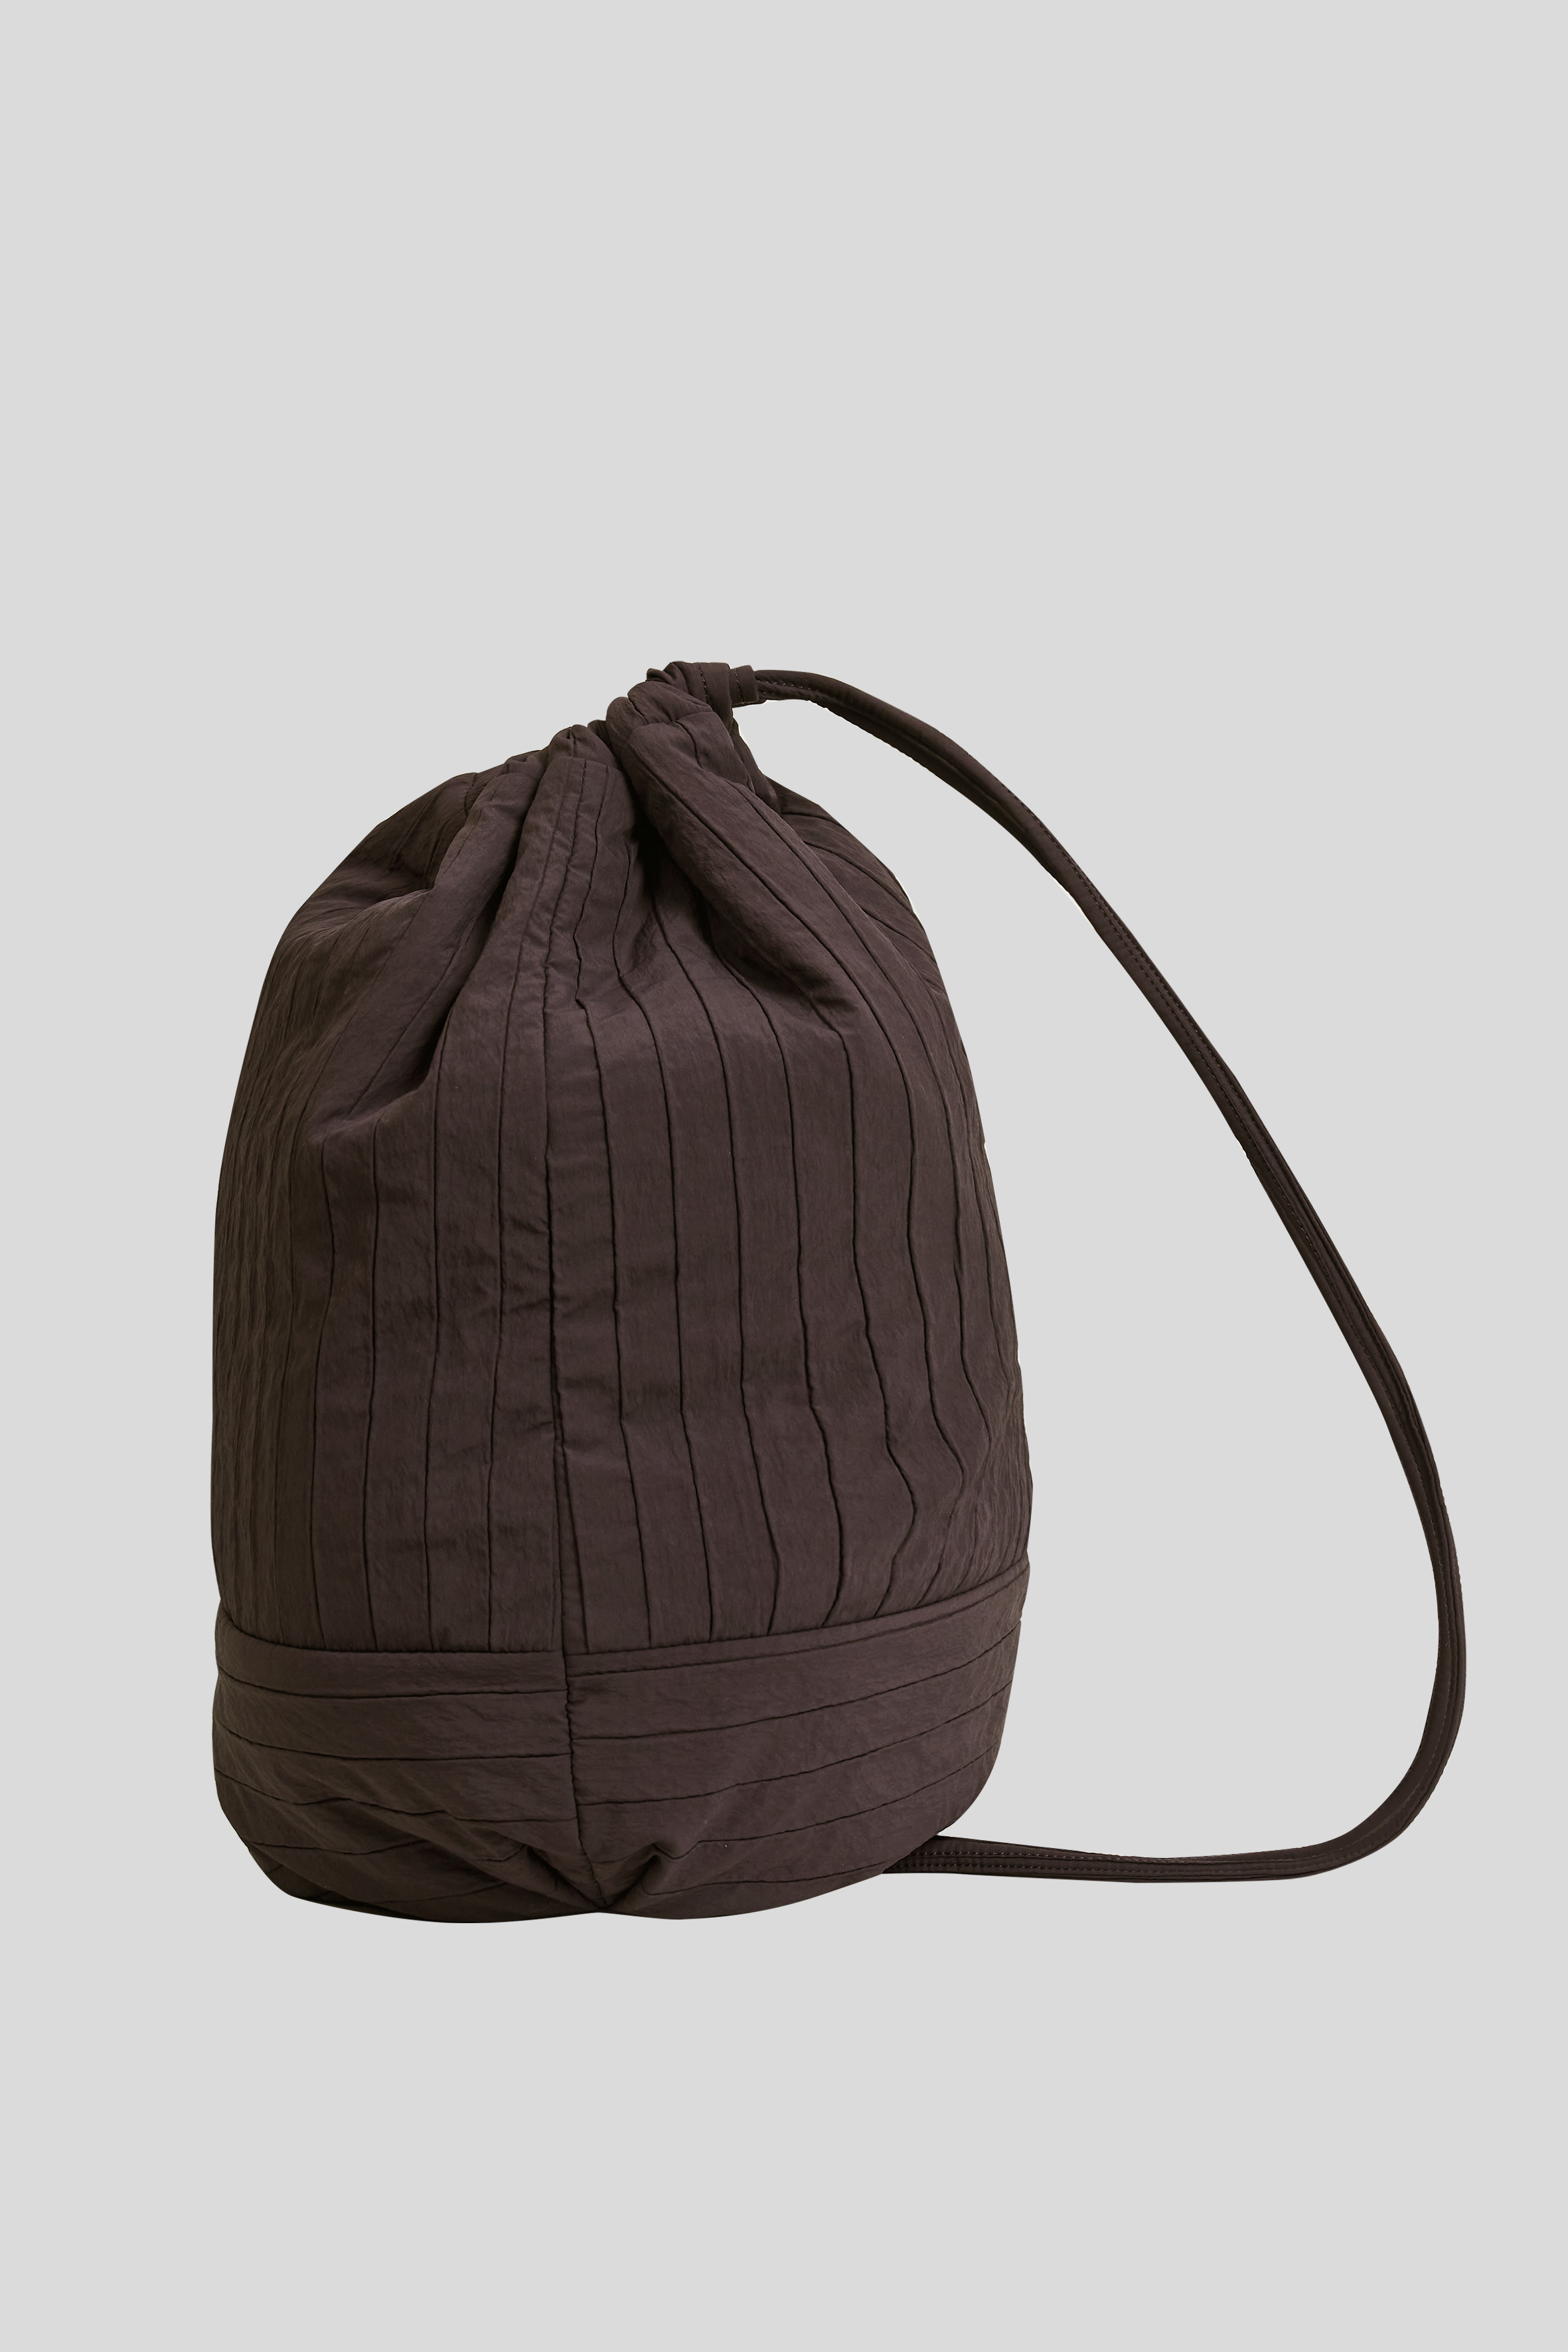 PADDED BALL BAG IN BROWN